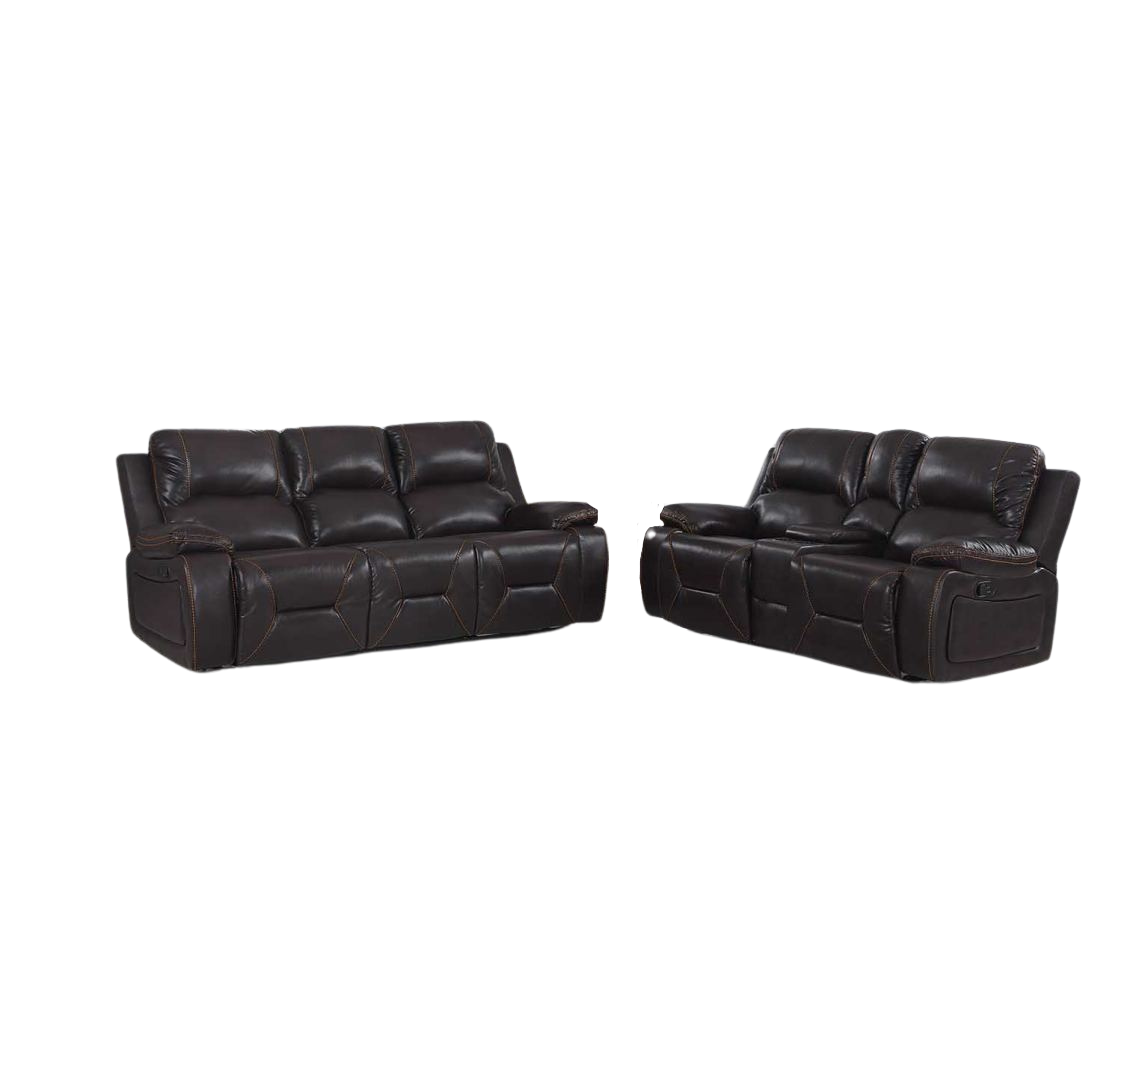 Two Piece Indoor Brown Faux Leather Five Person Seating Set-343853-1